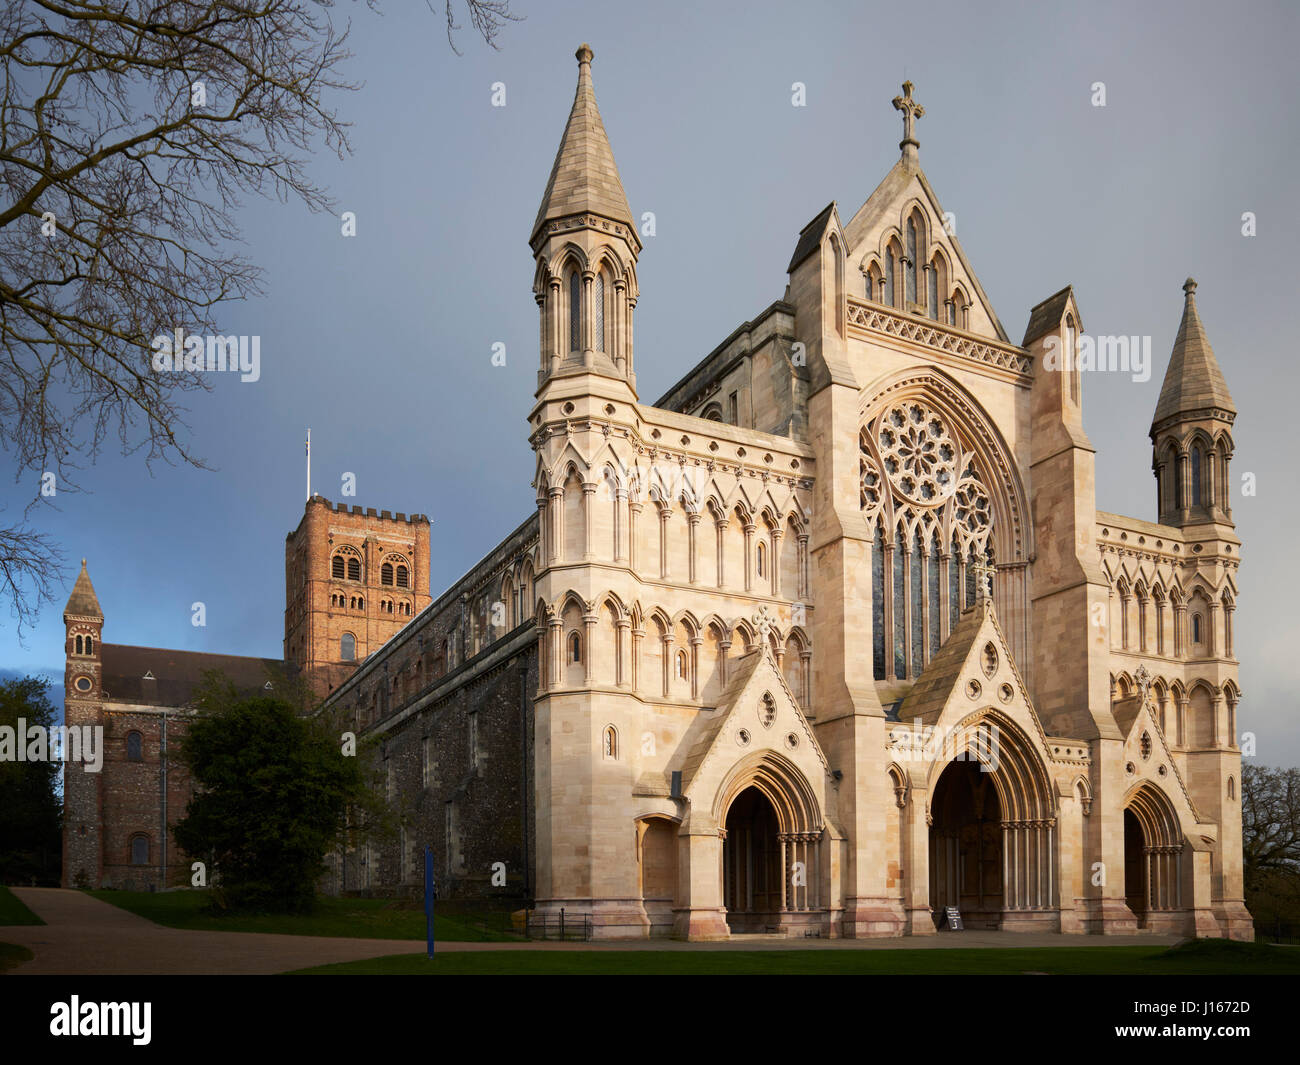 St Albans Cathedral (also known as St Albans Abbey), St Albans, UK. View from the West. Stock Photo